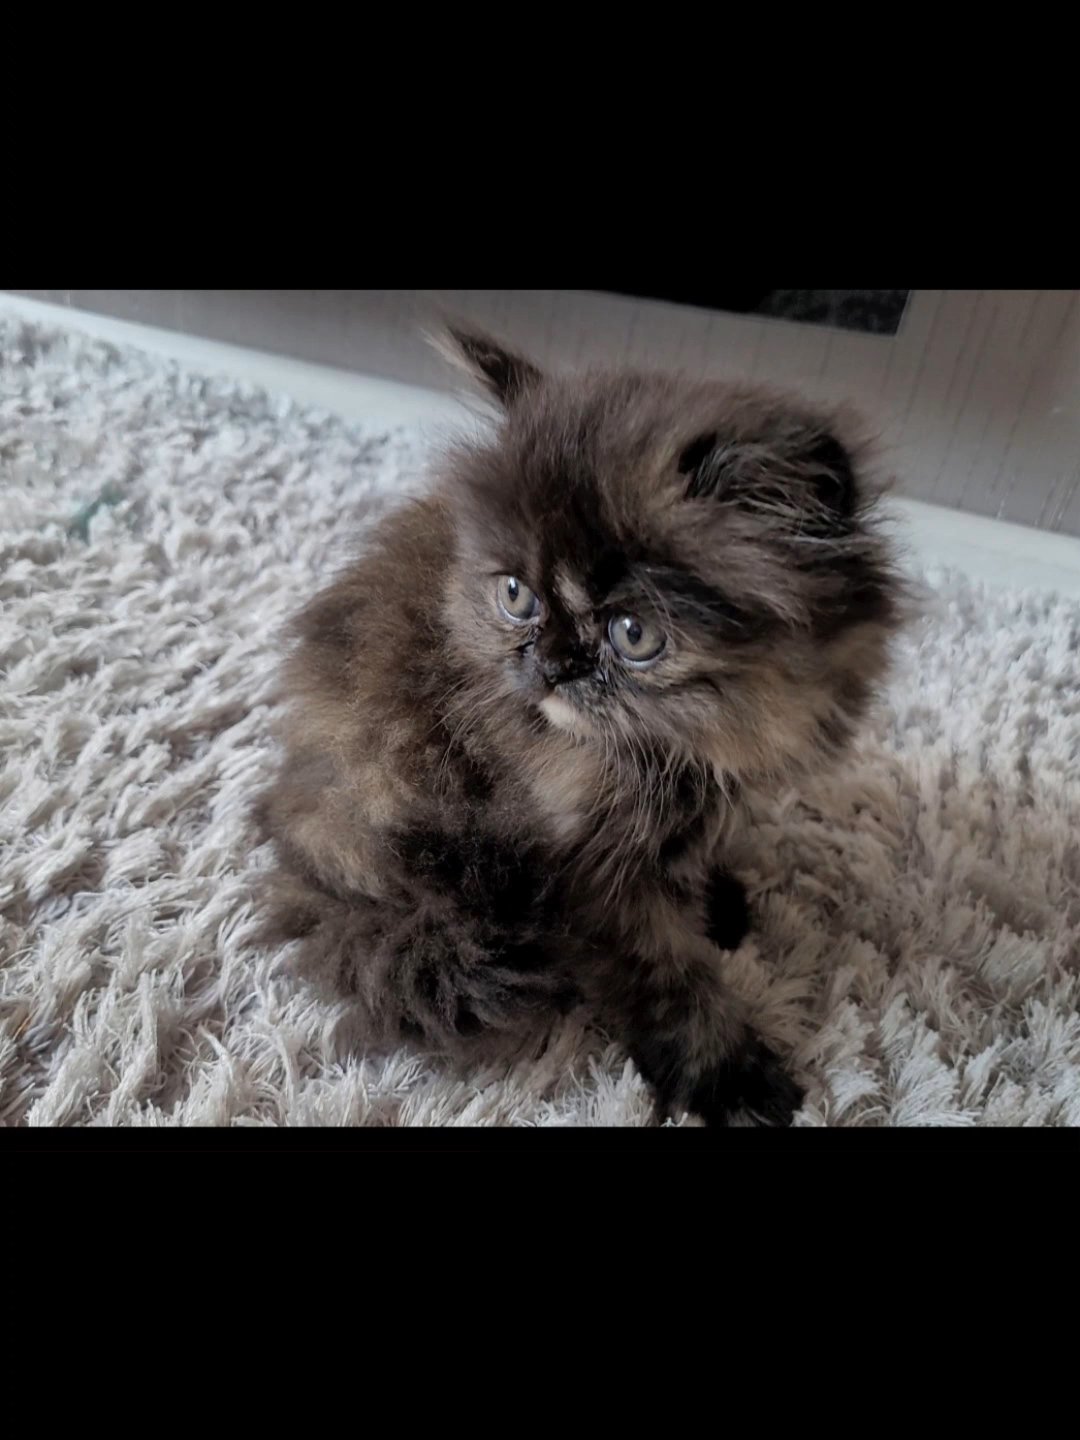 PURE BREED PERSIAN KITTENS FOR SALE FEMALE & MALE in Manchester